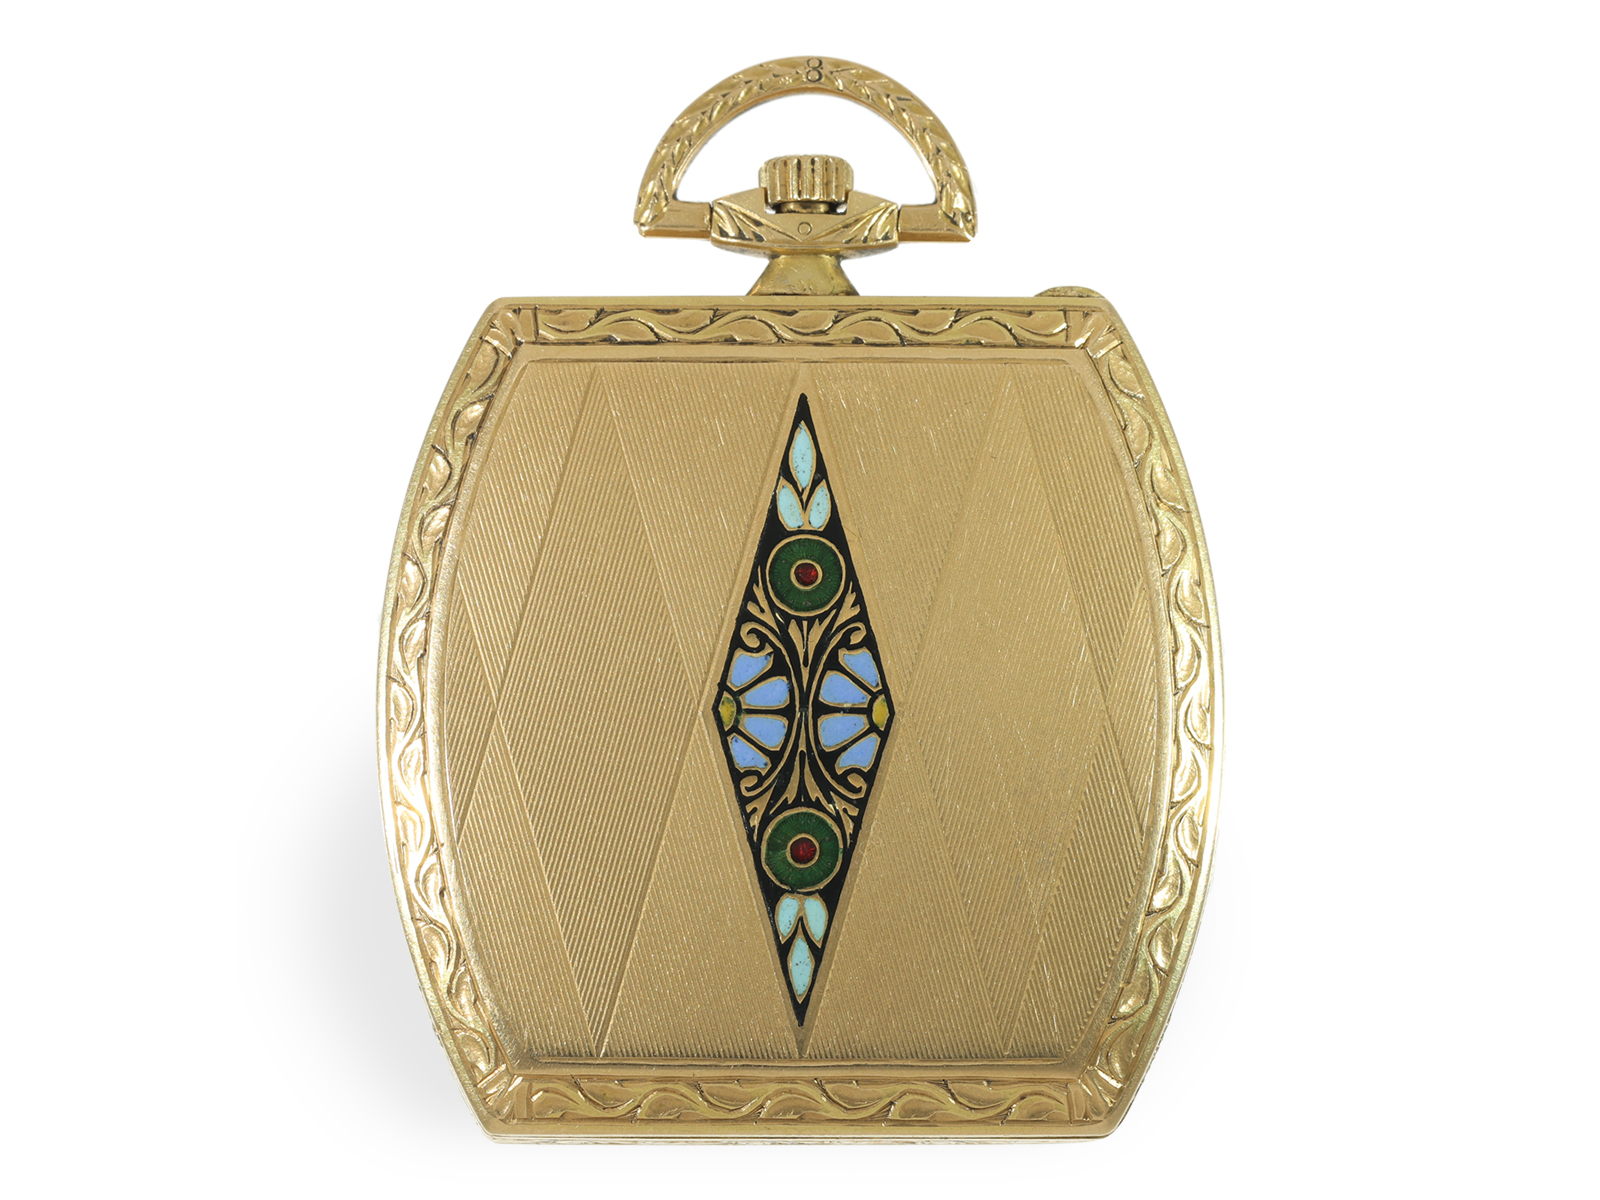 Pocket watch: extremely rare Art Deco gold/enamel dress watch in chronometer quality, ca. 1925 - Image 2 of 6